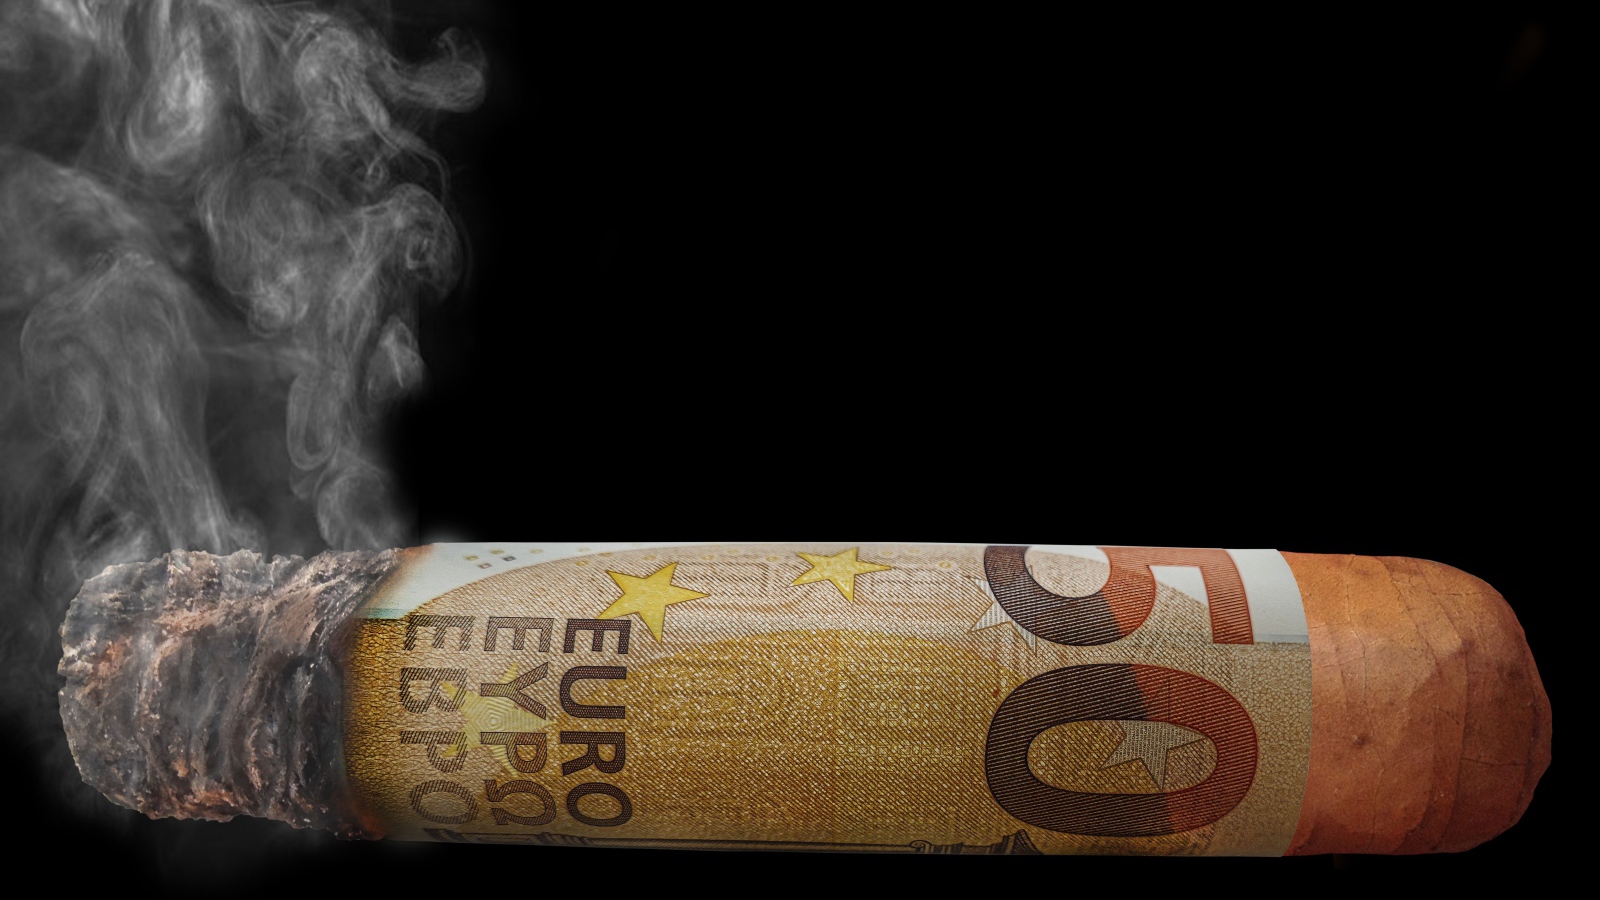 Cigar from euro banknotes on a black background